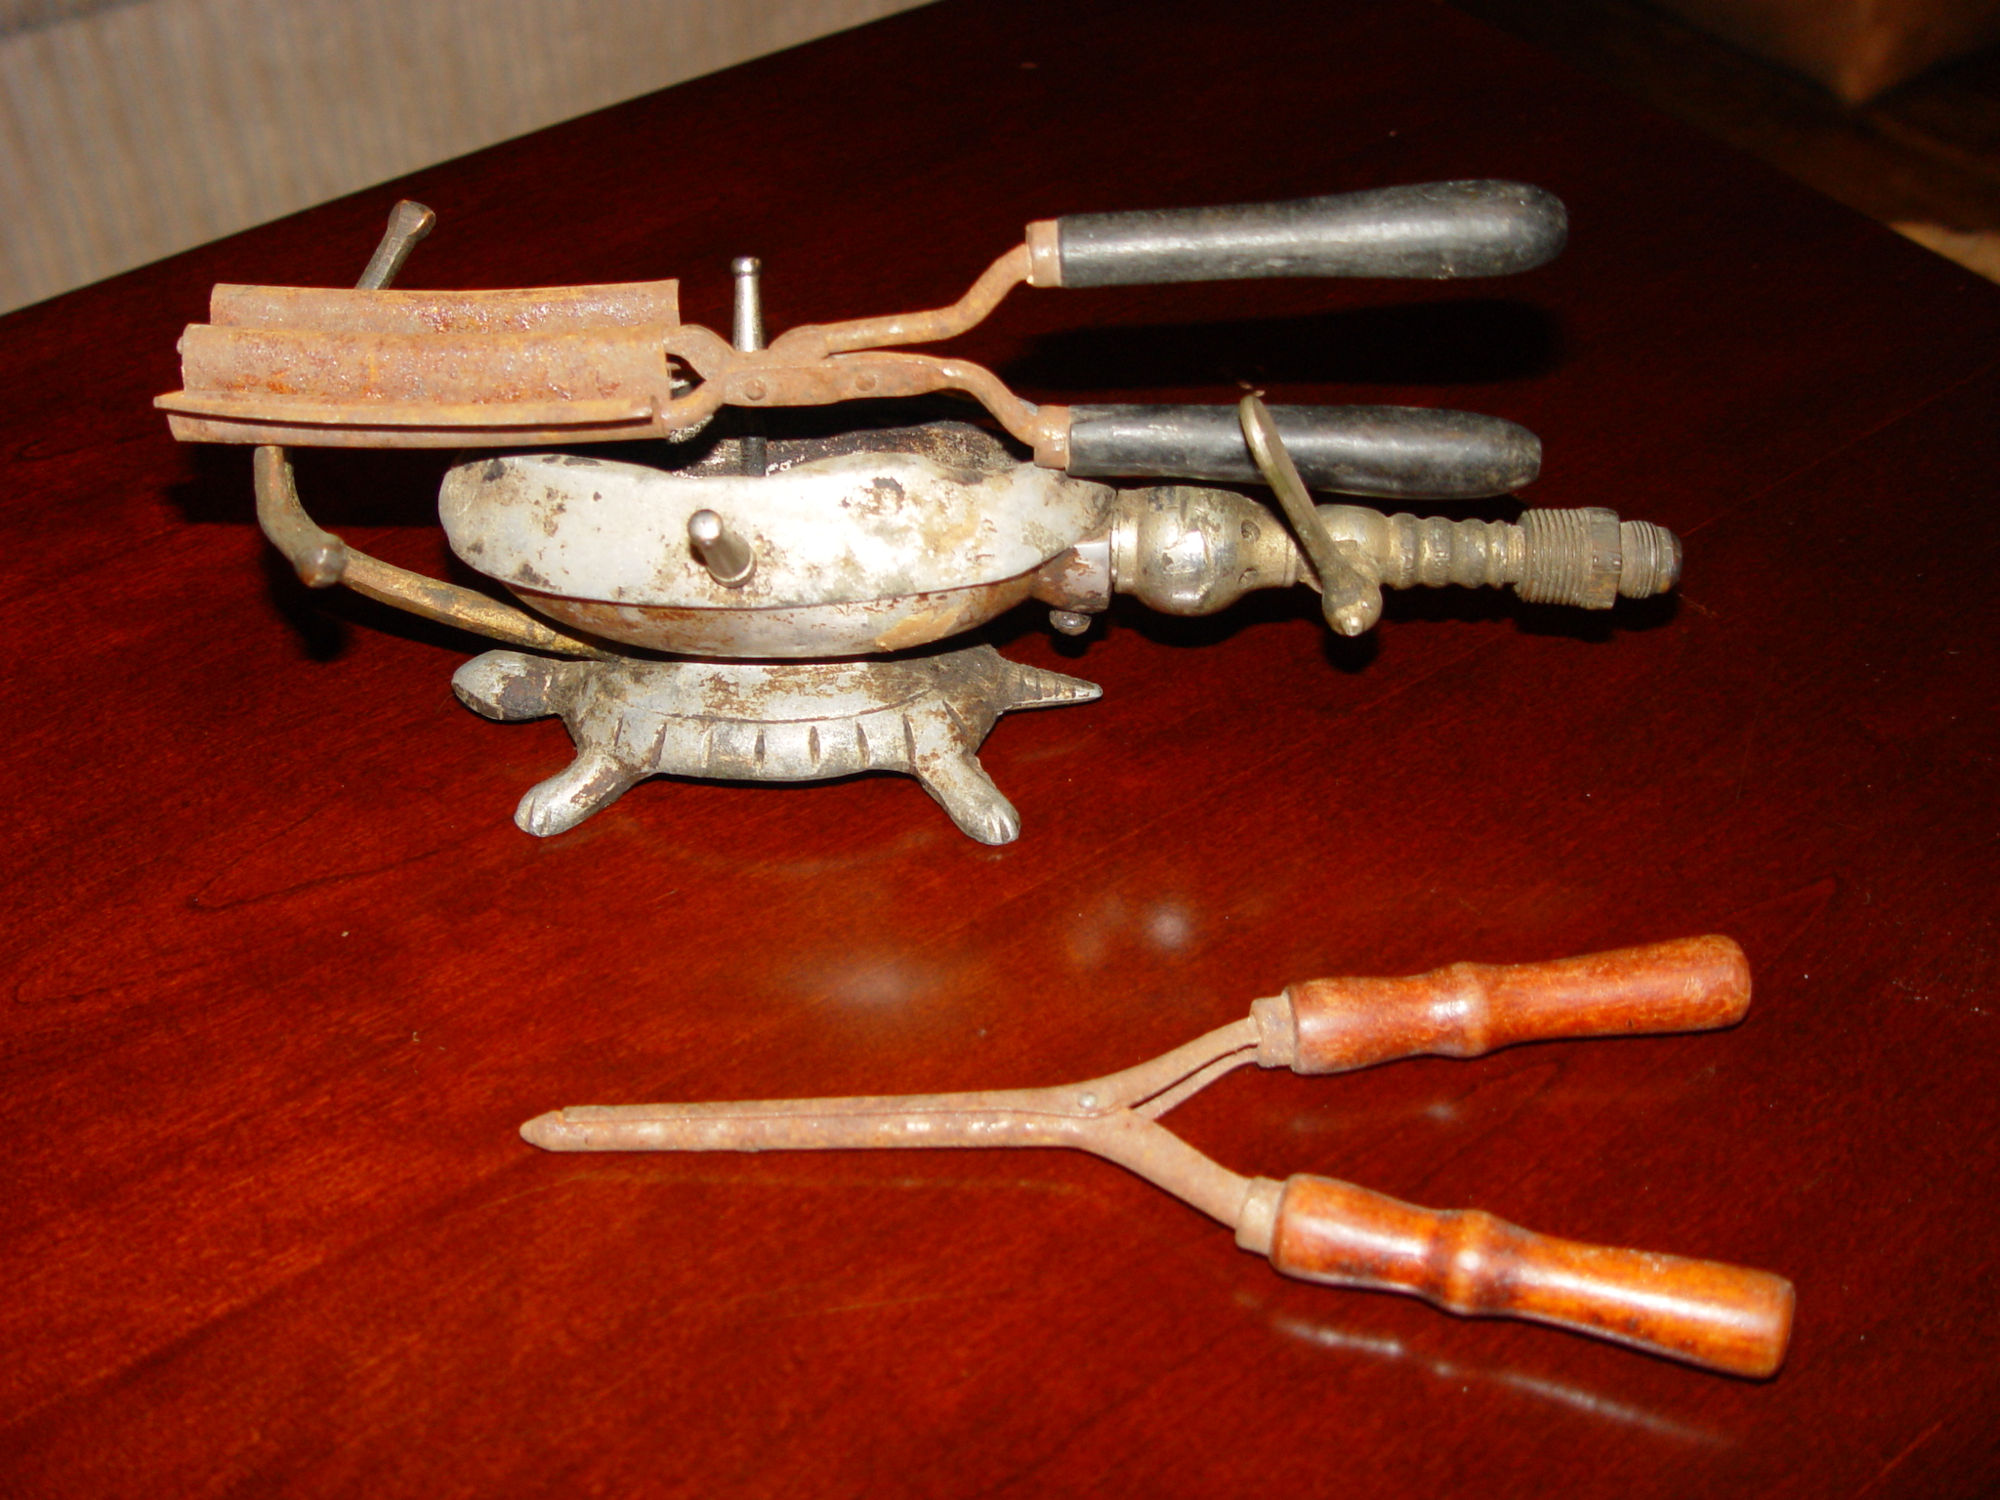 Nickle Plated Gas Heating
                                        Figural Turtle & Two
                                        Victorian Curling Irons